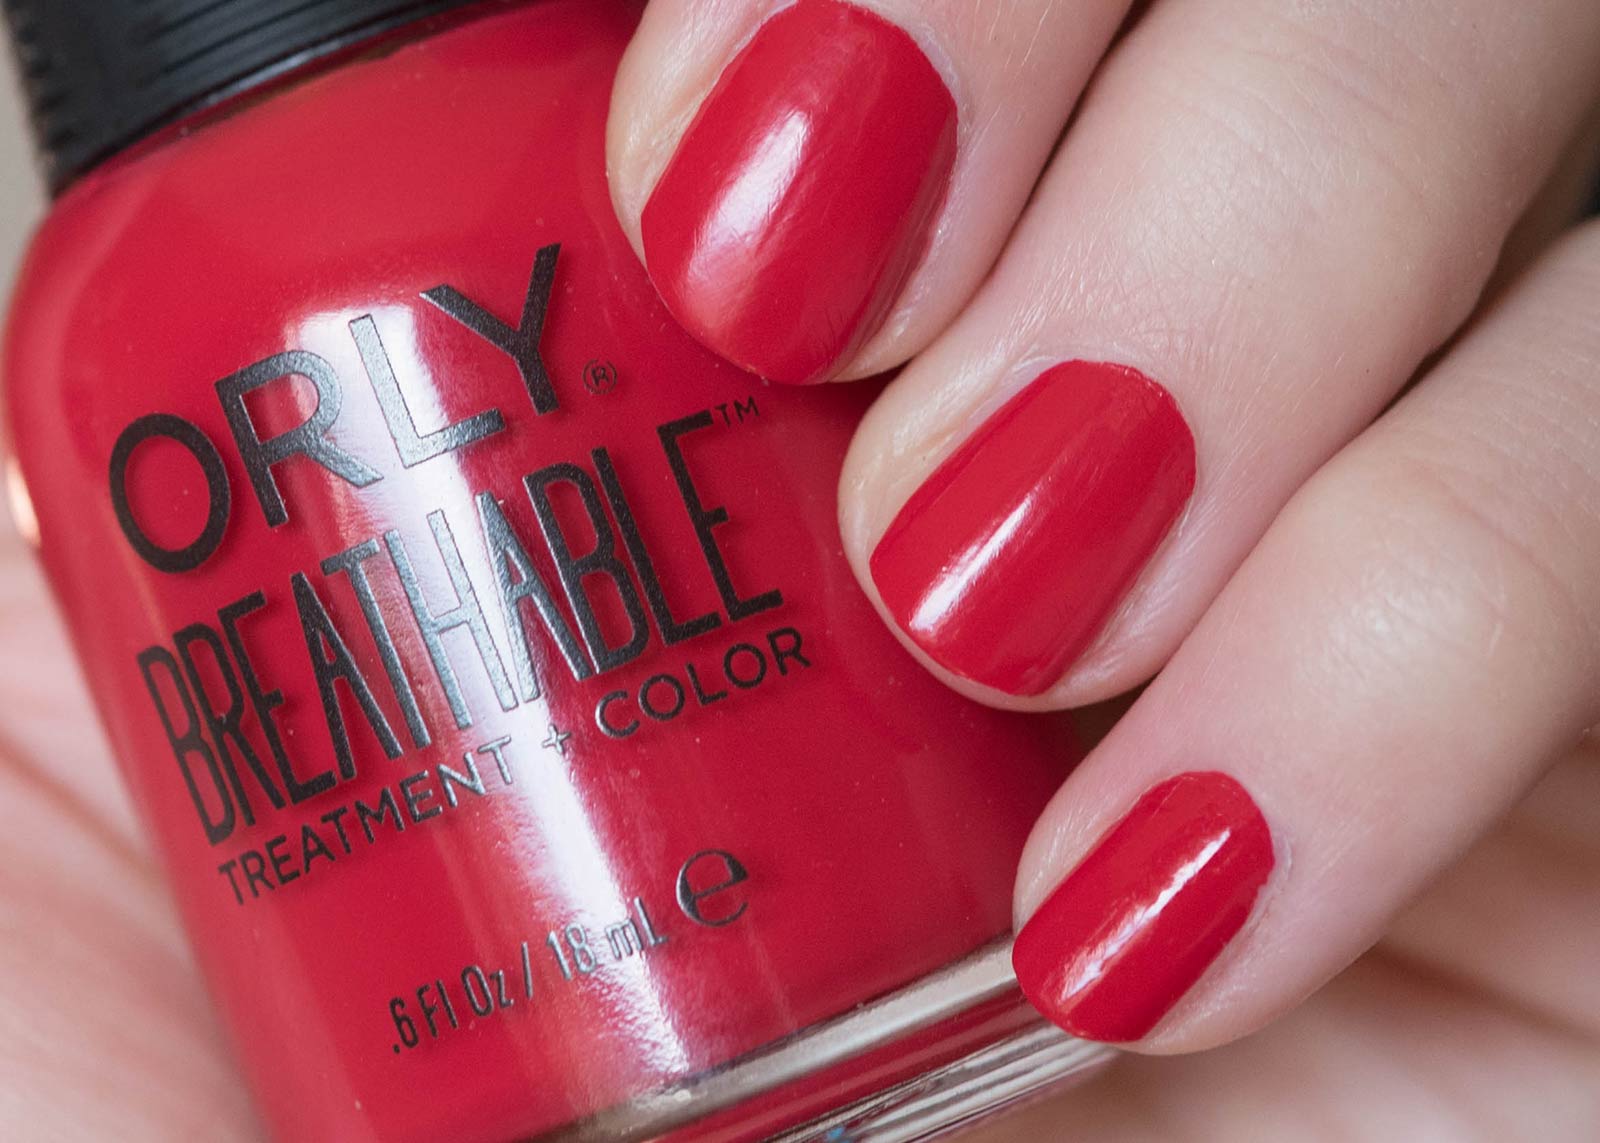 9. Orly Breathable Treatment + Color in "Love My Nails" - wide 3